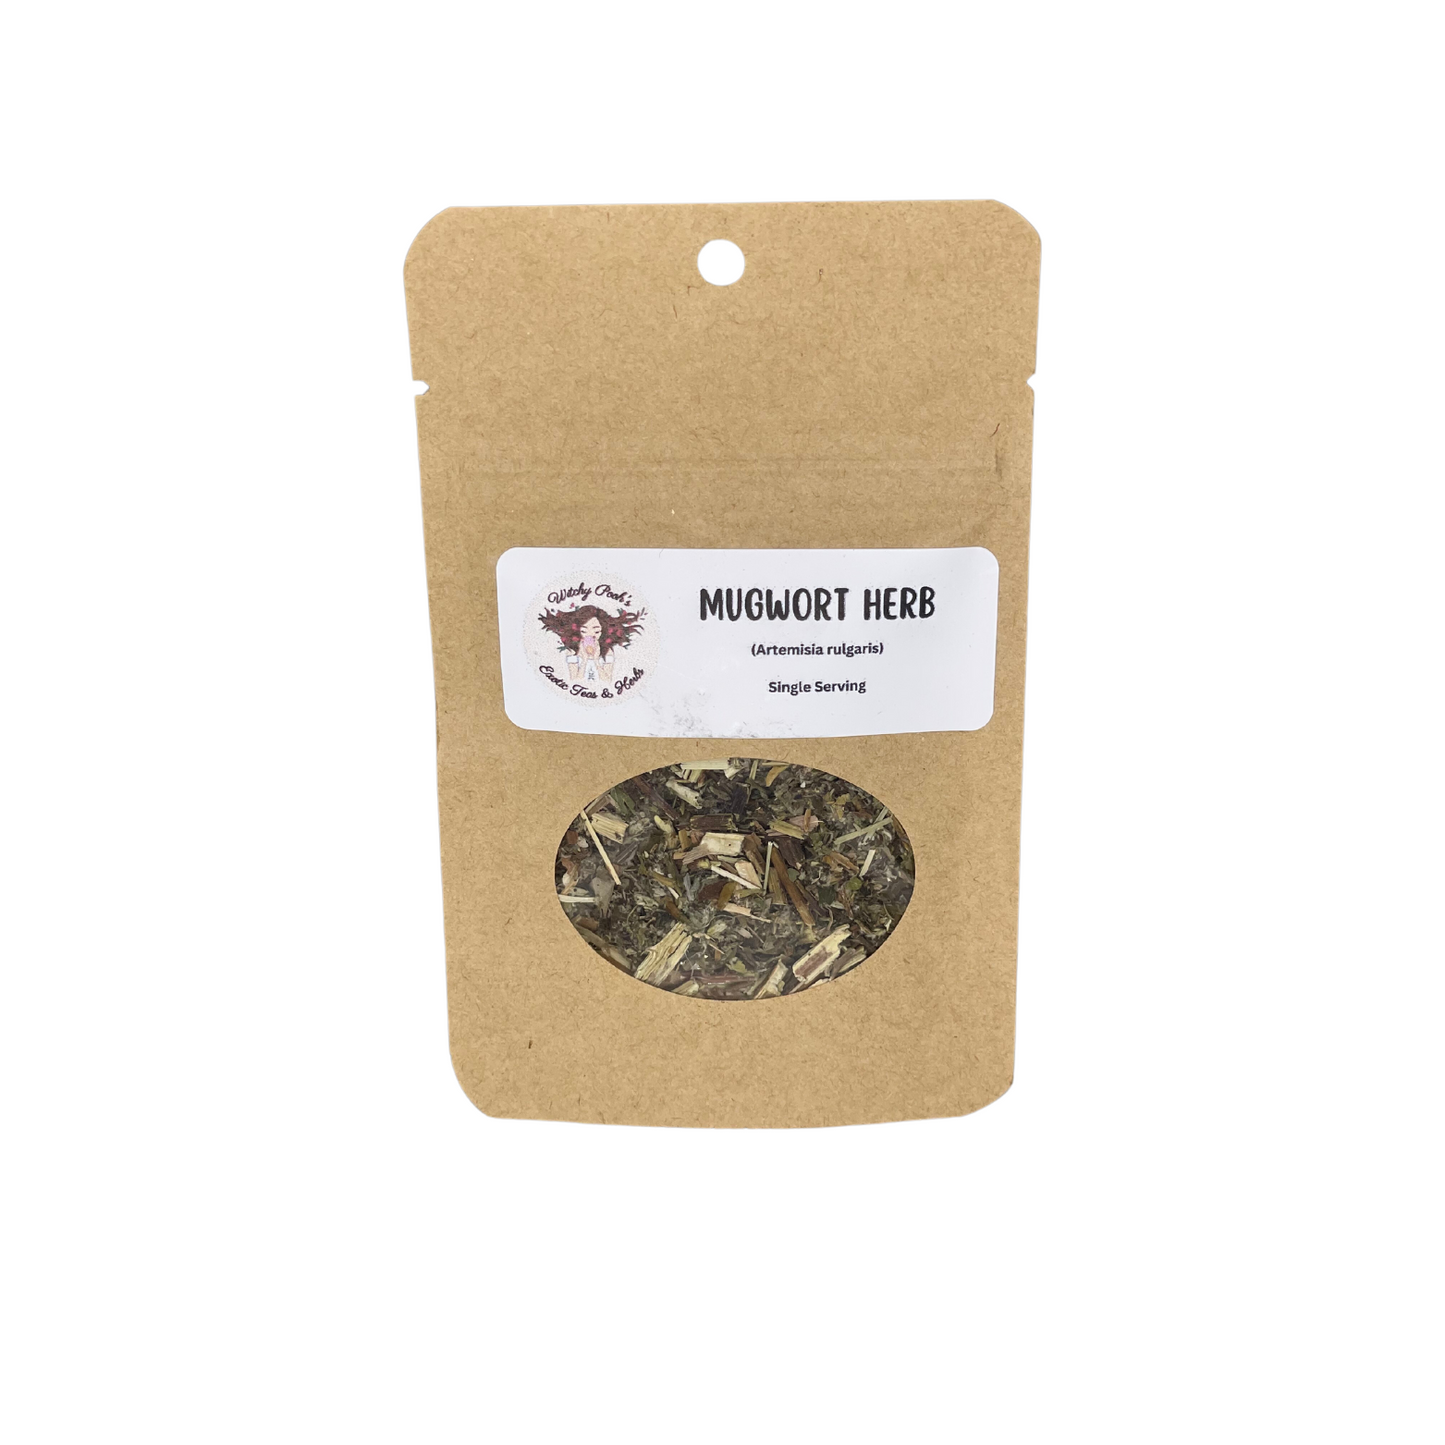 Mugwort Herb For Ceremonial Practice Smudging Vivid Meditation to Connect with the Ancestors